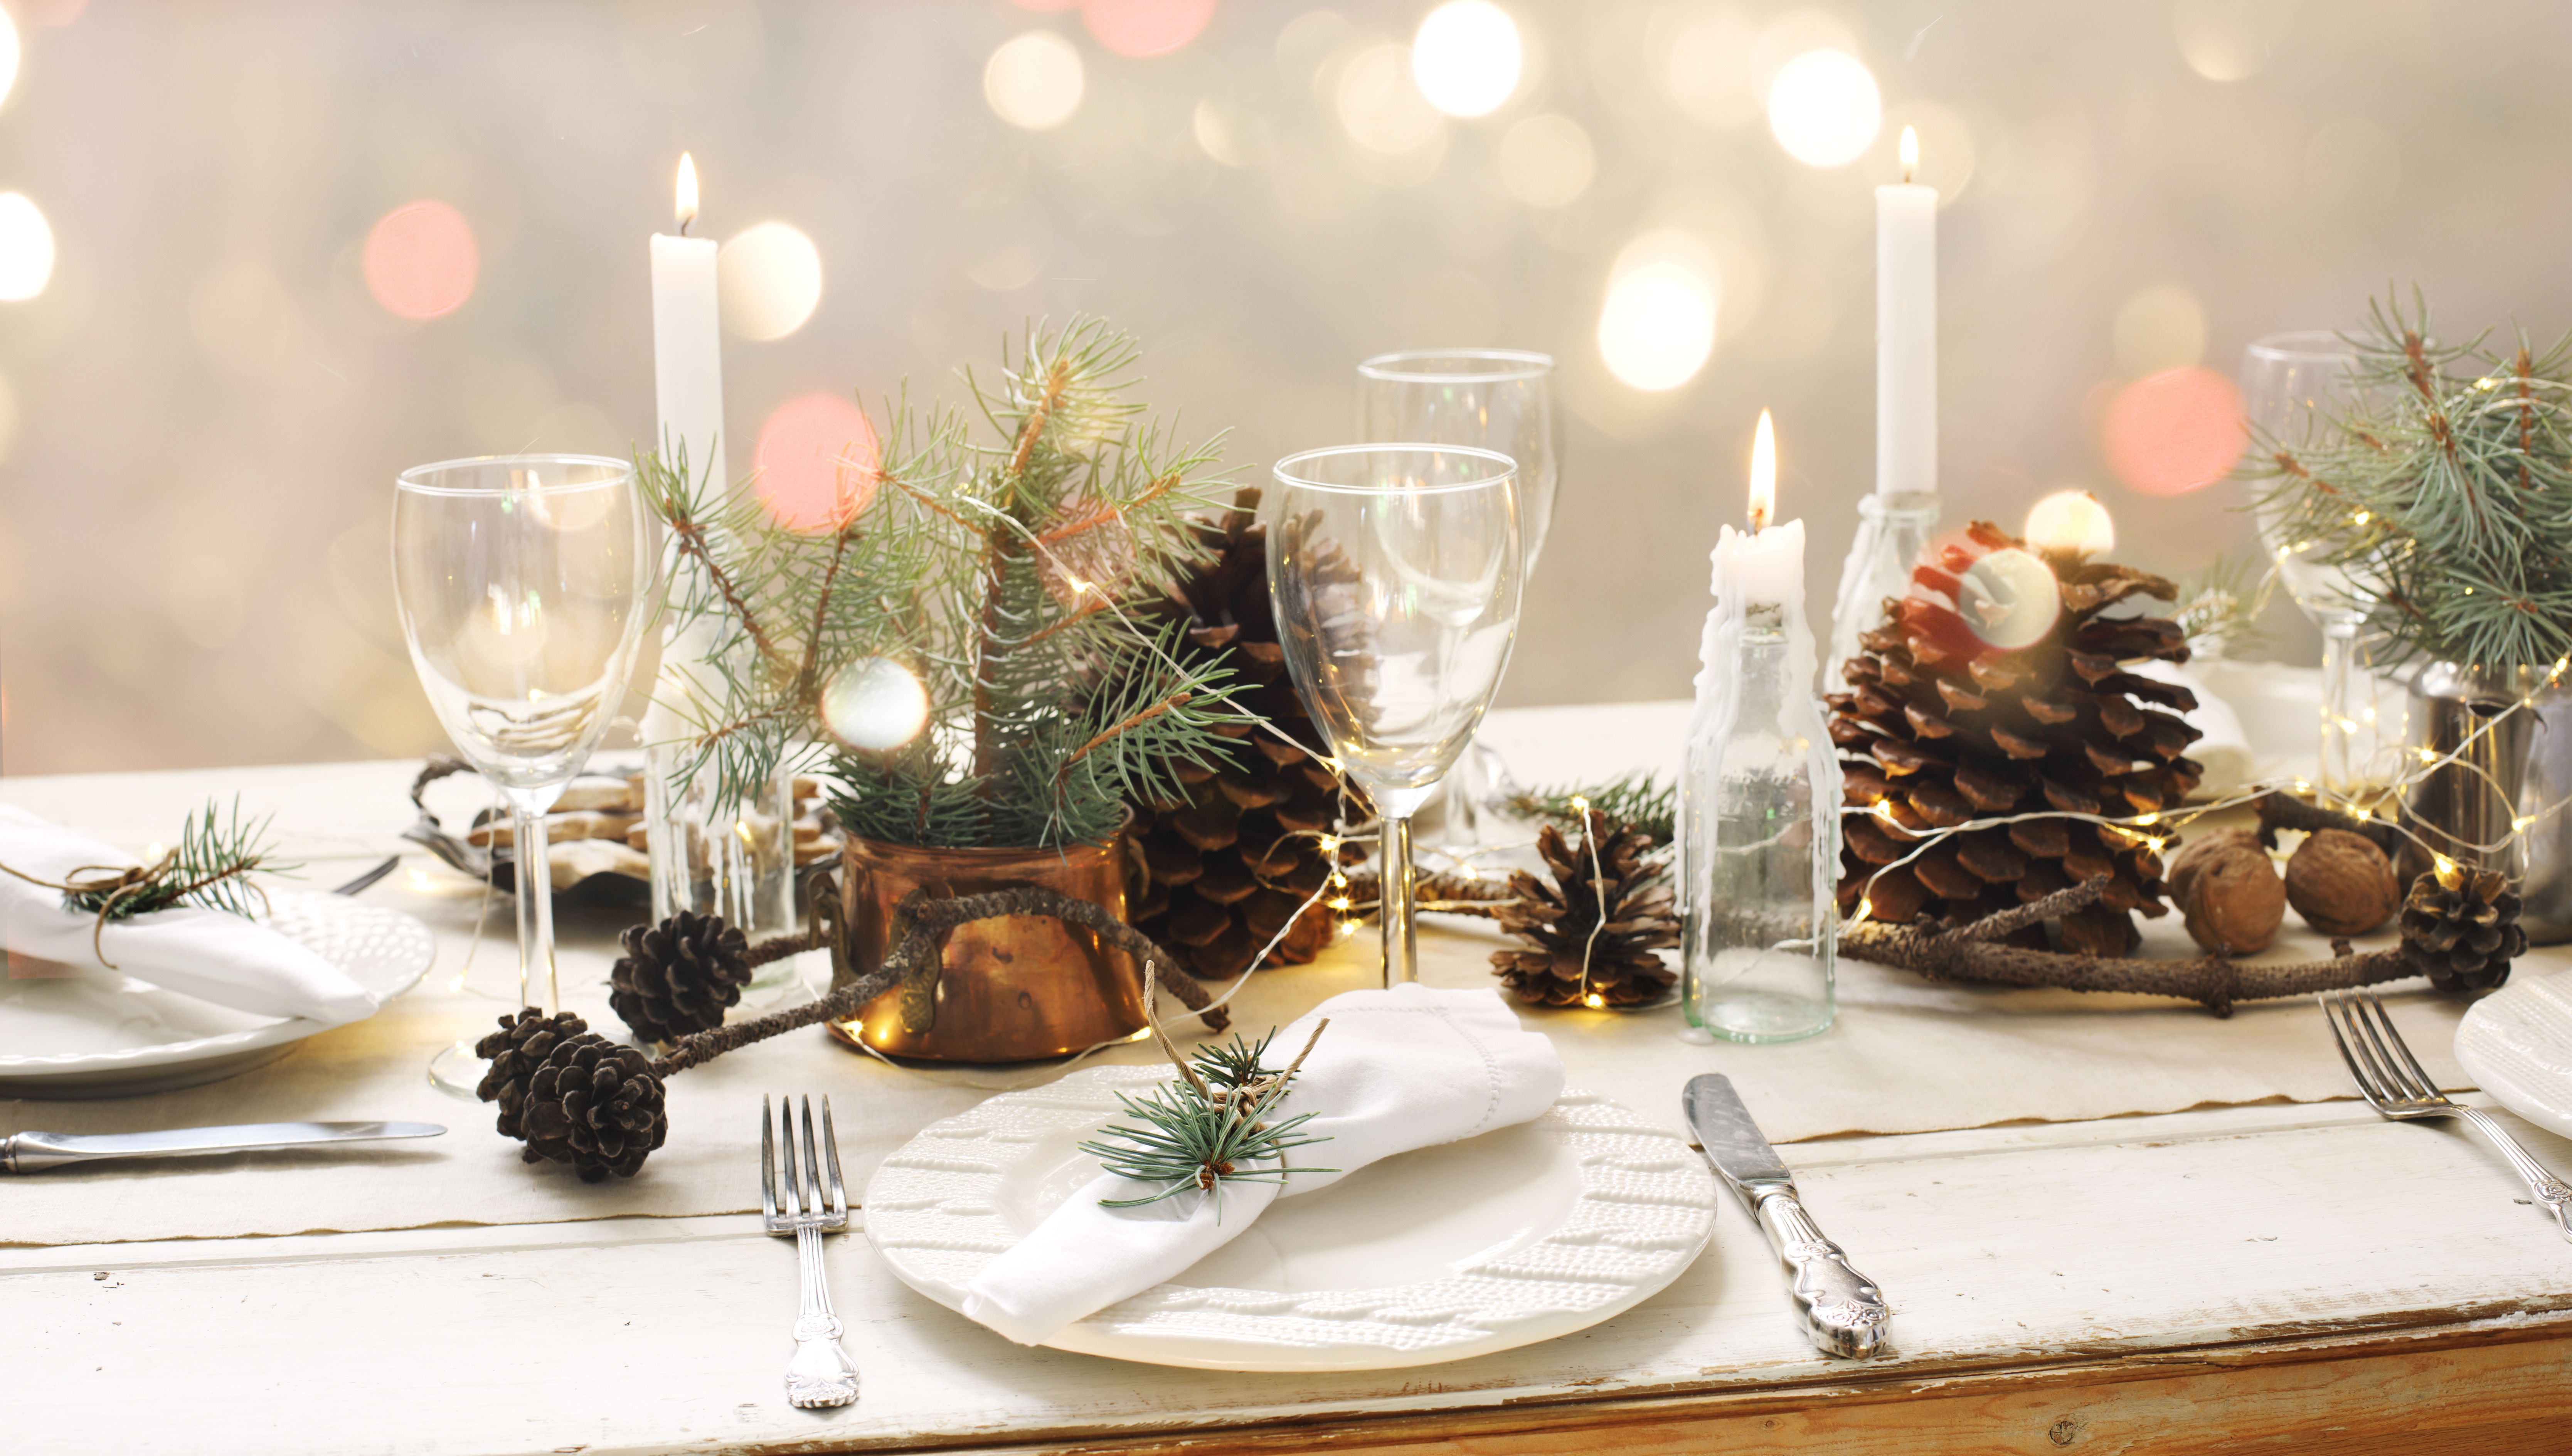 christmas dining table setting with fir tree and pine cone